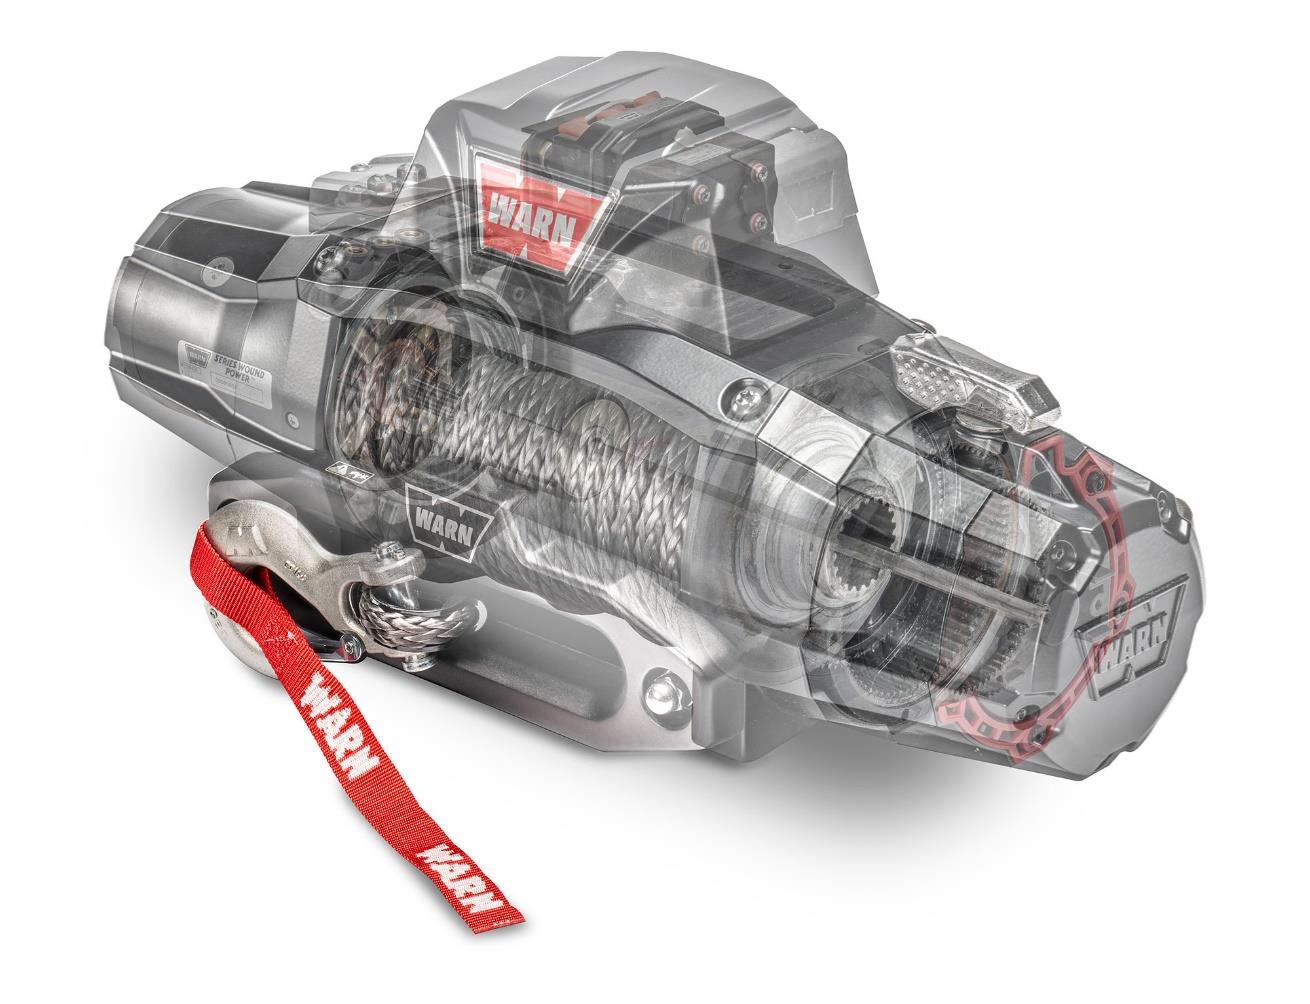 WARN 110010 ZEON XD 10-S Winch Synthetic Rope